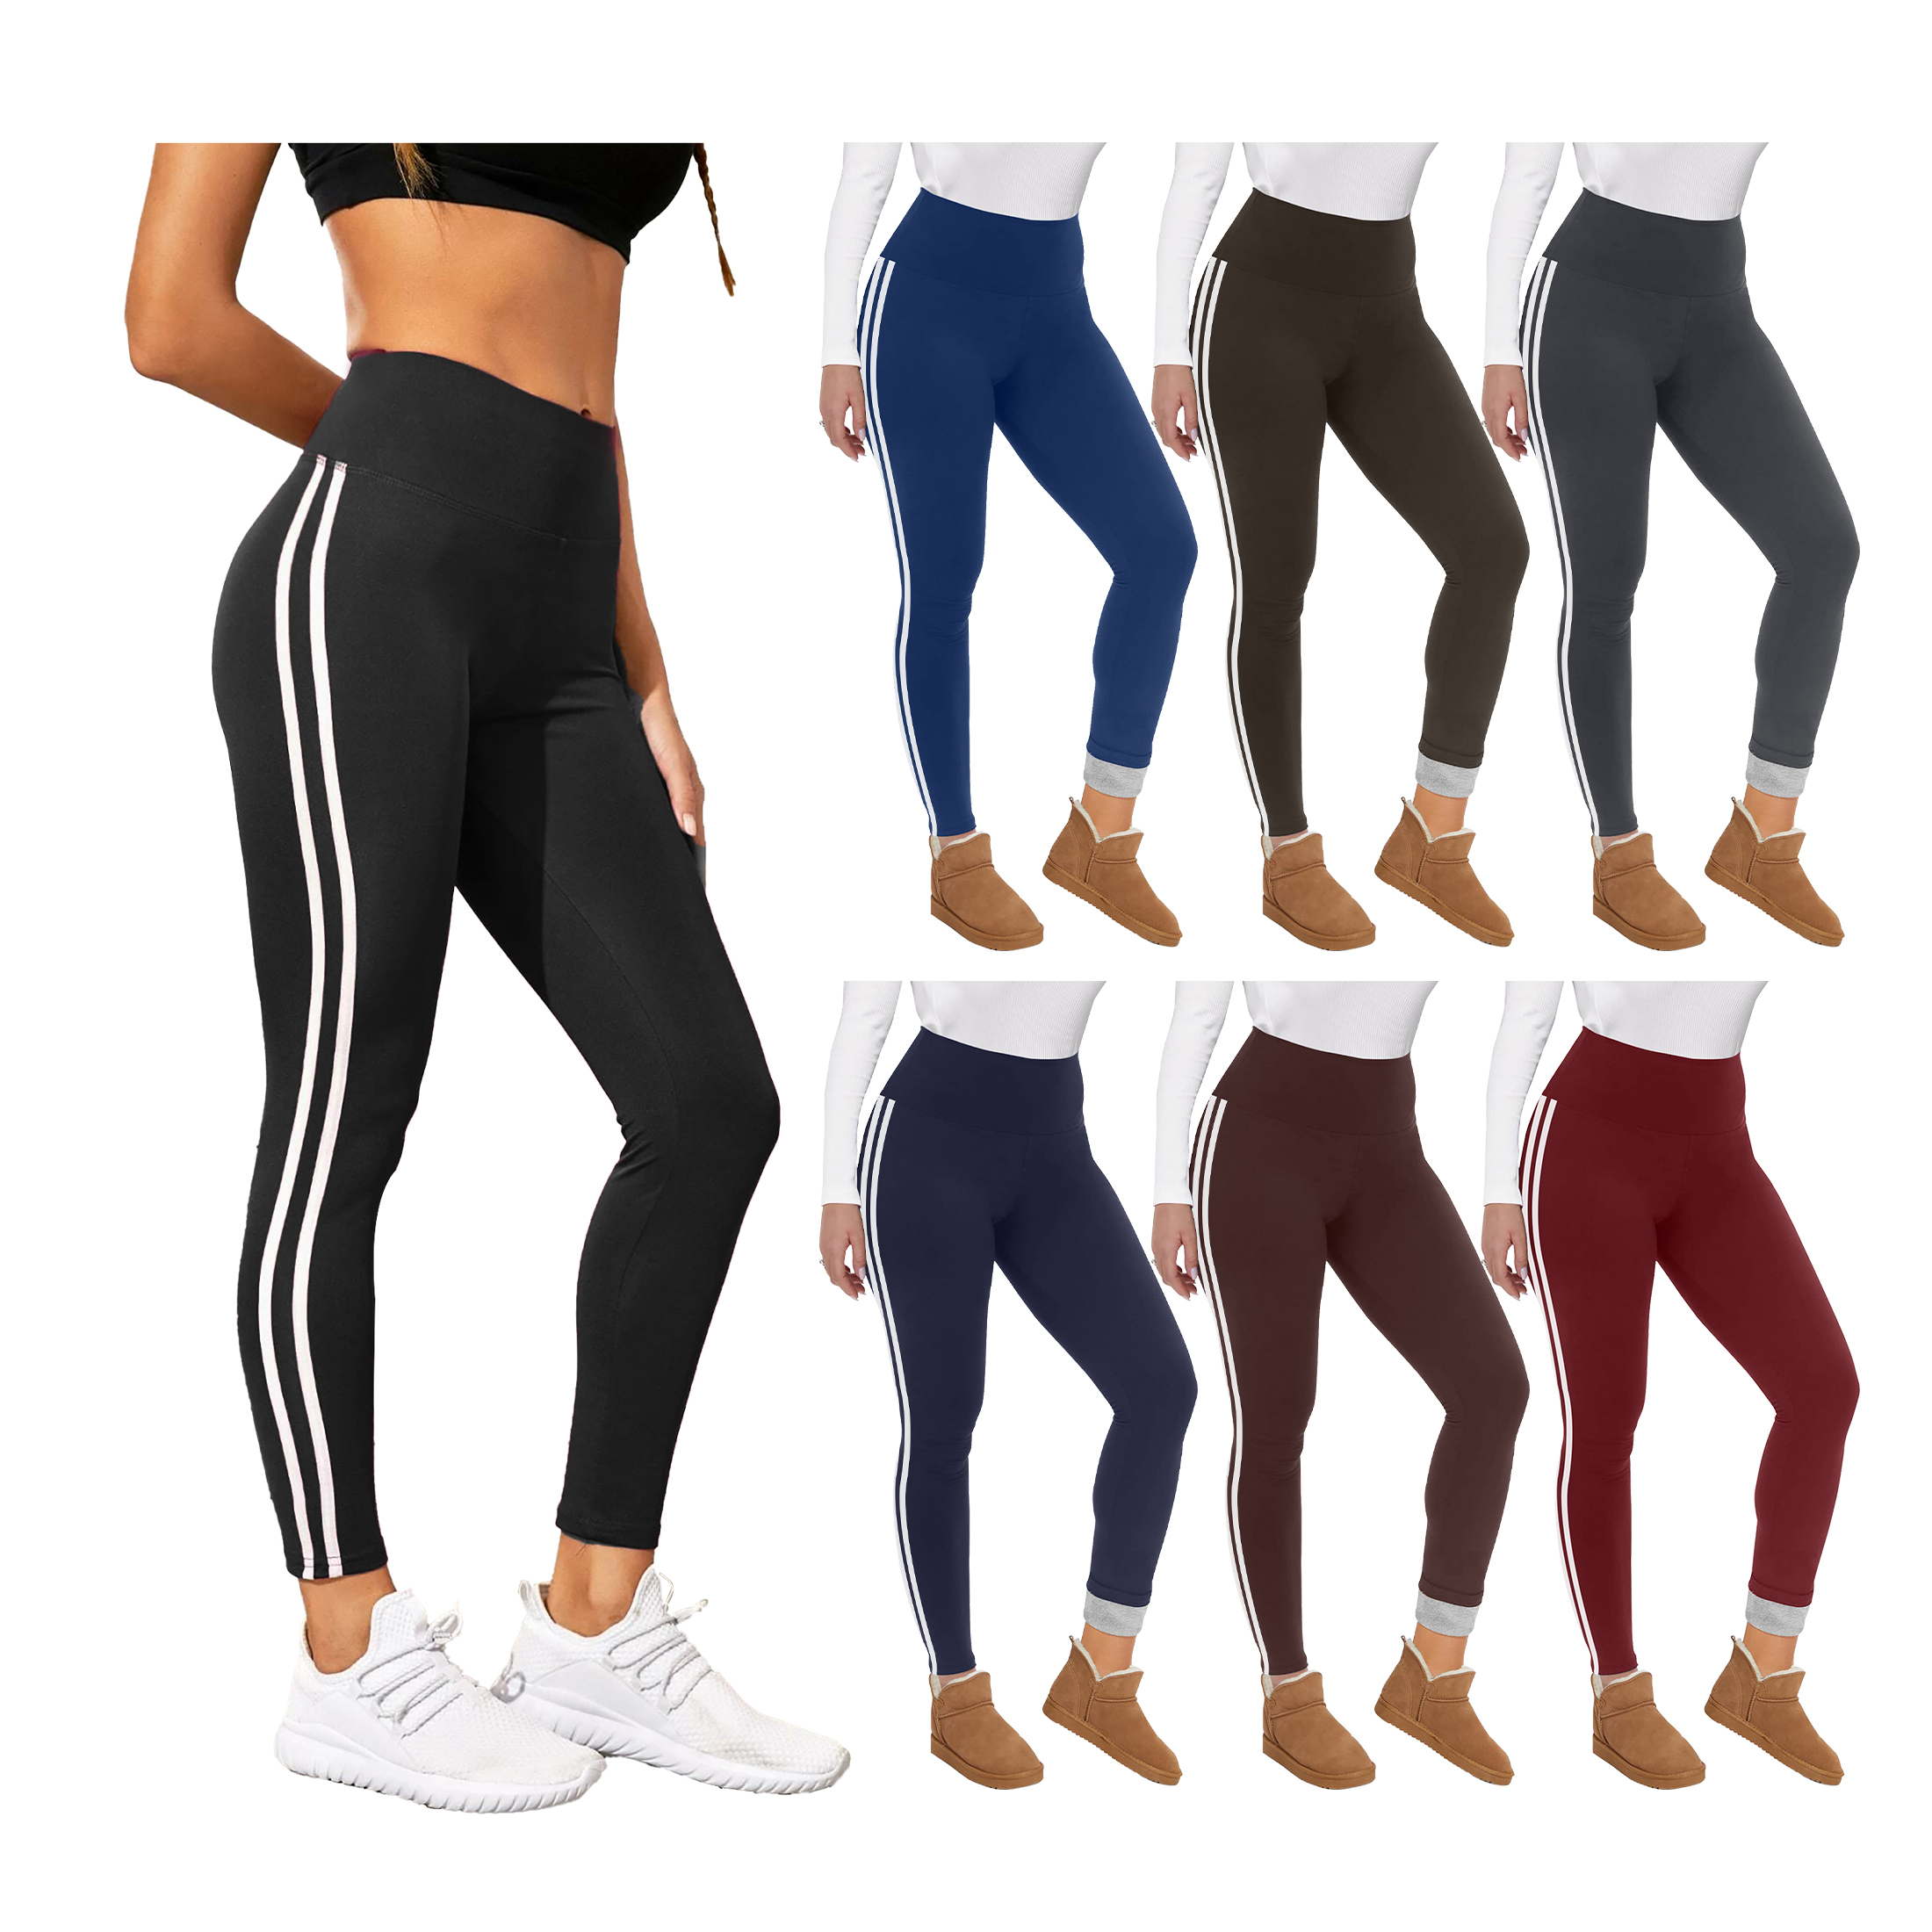 4-Pack: Women's Ultra Soft Fur Lined Yoga Pants High Waisted Leggings - Large/X-Large